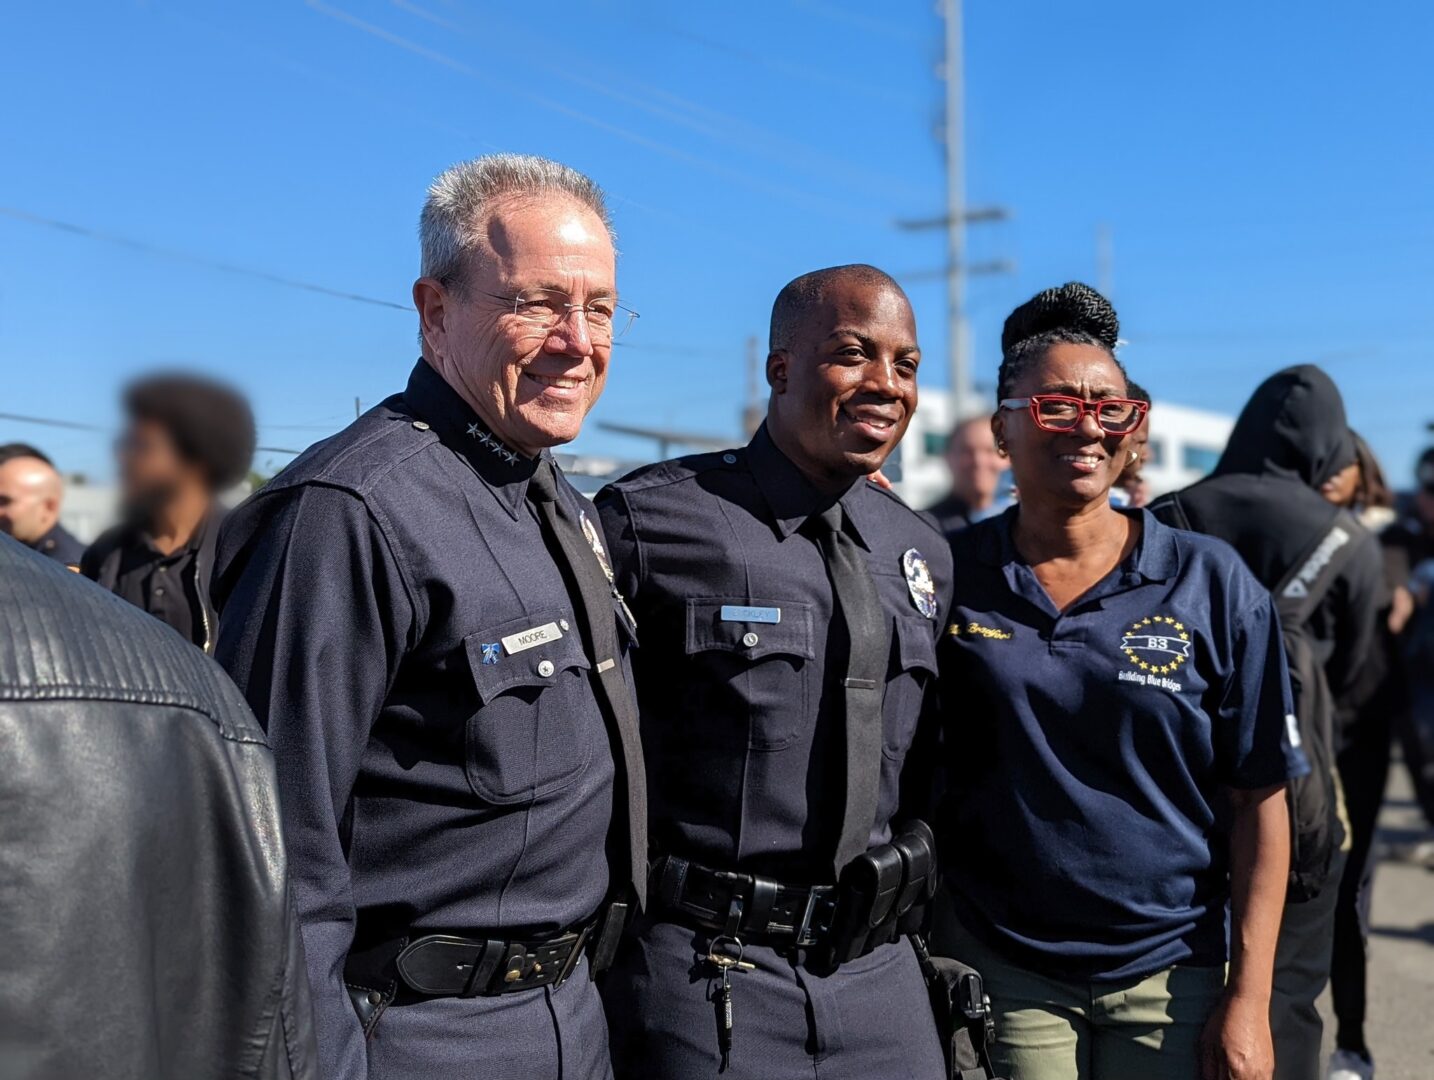 Daphne Bradford of Build Blue Bridges stnads for a photo with LAPD Chief Moore and another LAPD Officer.